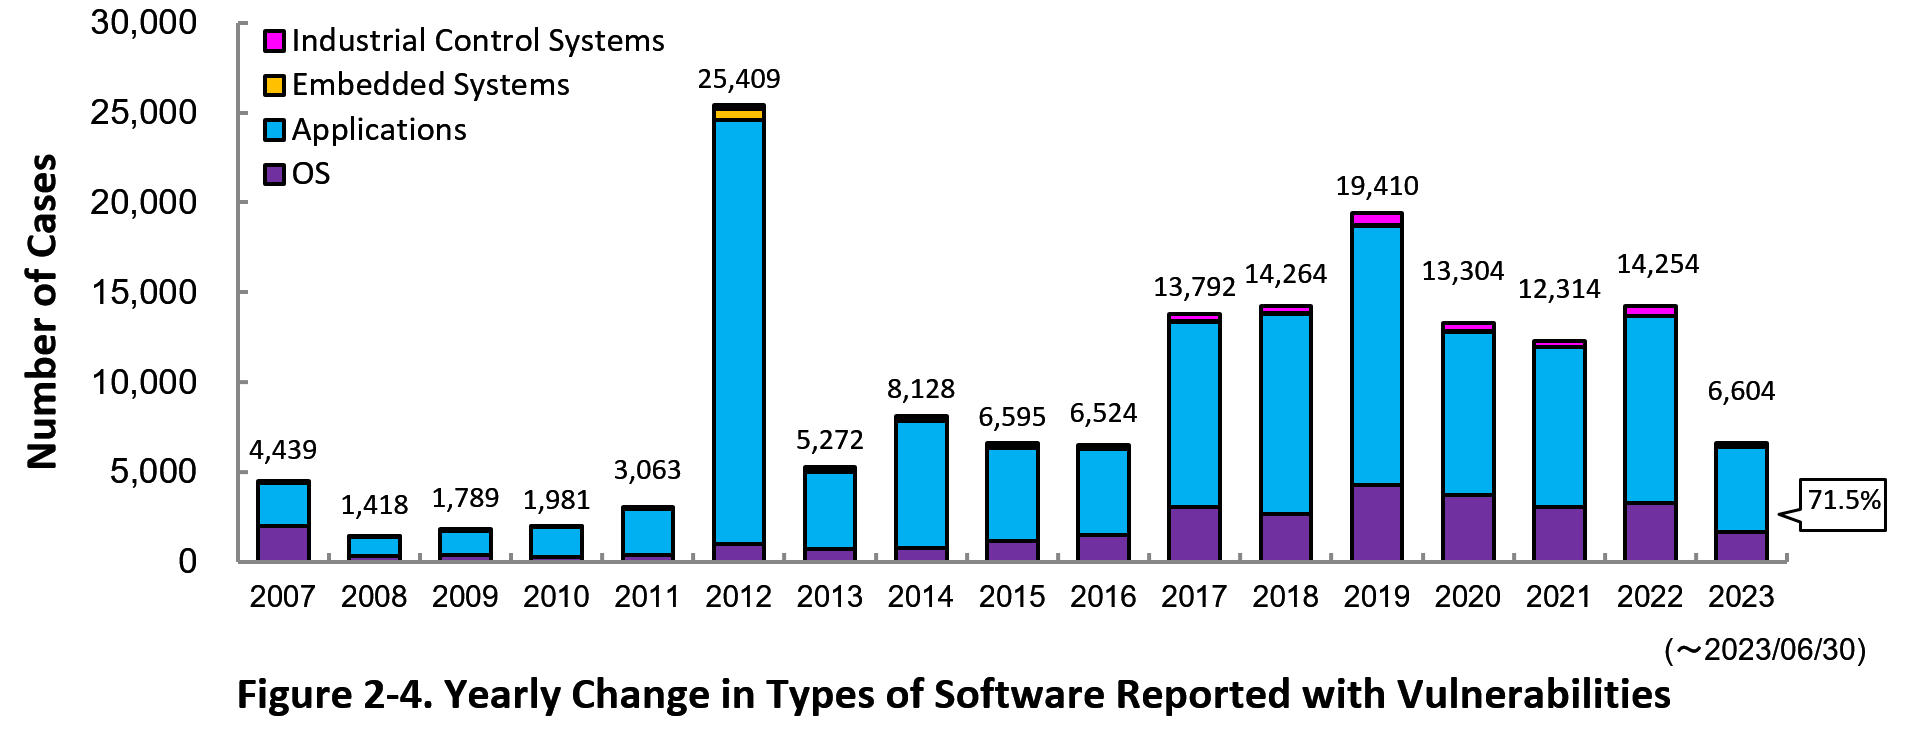 Figure 2-4. Yearly Change in Types of Software Reported with Vulnerabilities 